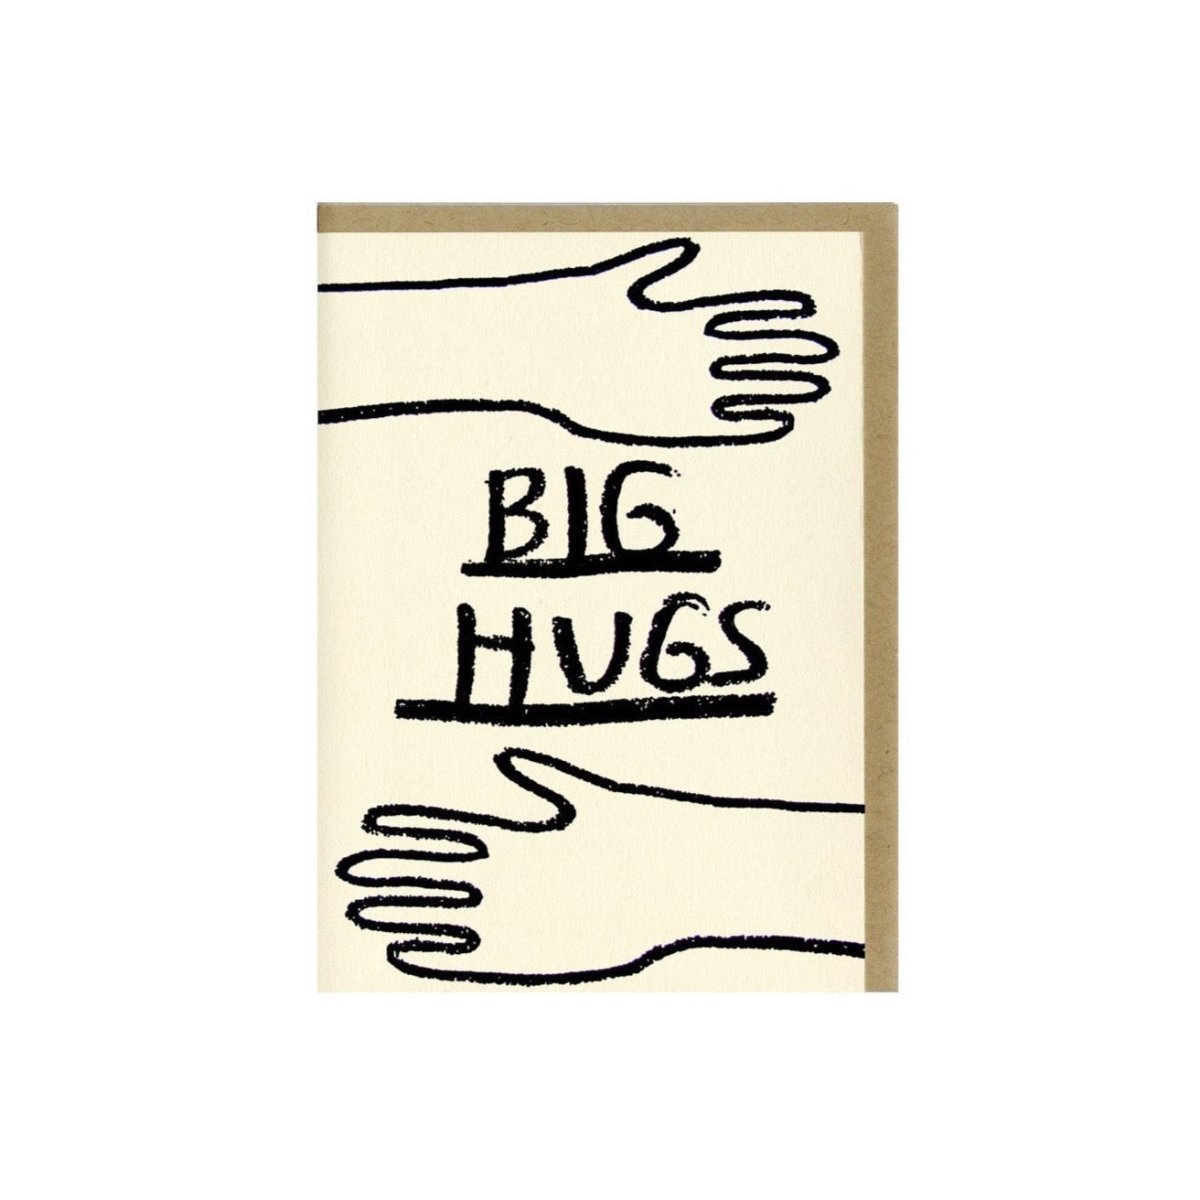 Letterpress printed greeting card reads "BIG HUGS" framed by two hands reaching across the top and bottom portion of the card. Card comes with a Kraft colored envelope. Printed in Oakland, California by People I've Loved.